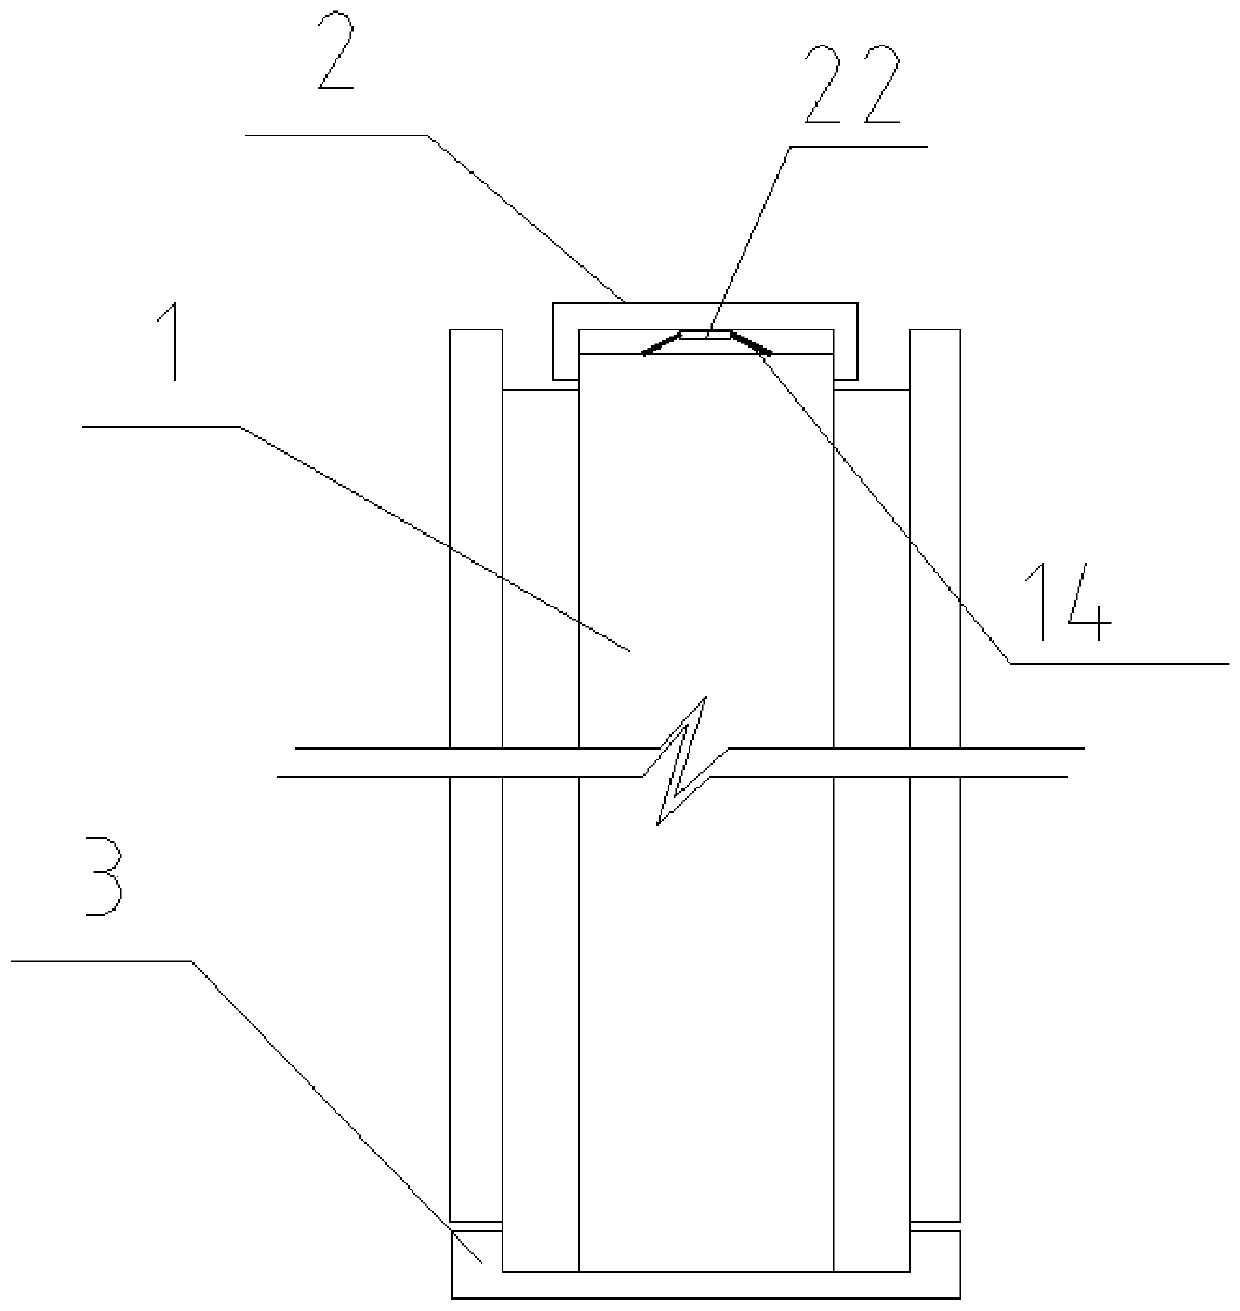 Mounting method for partition board with good anti-seismic property